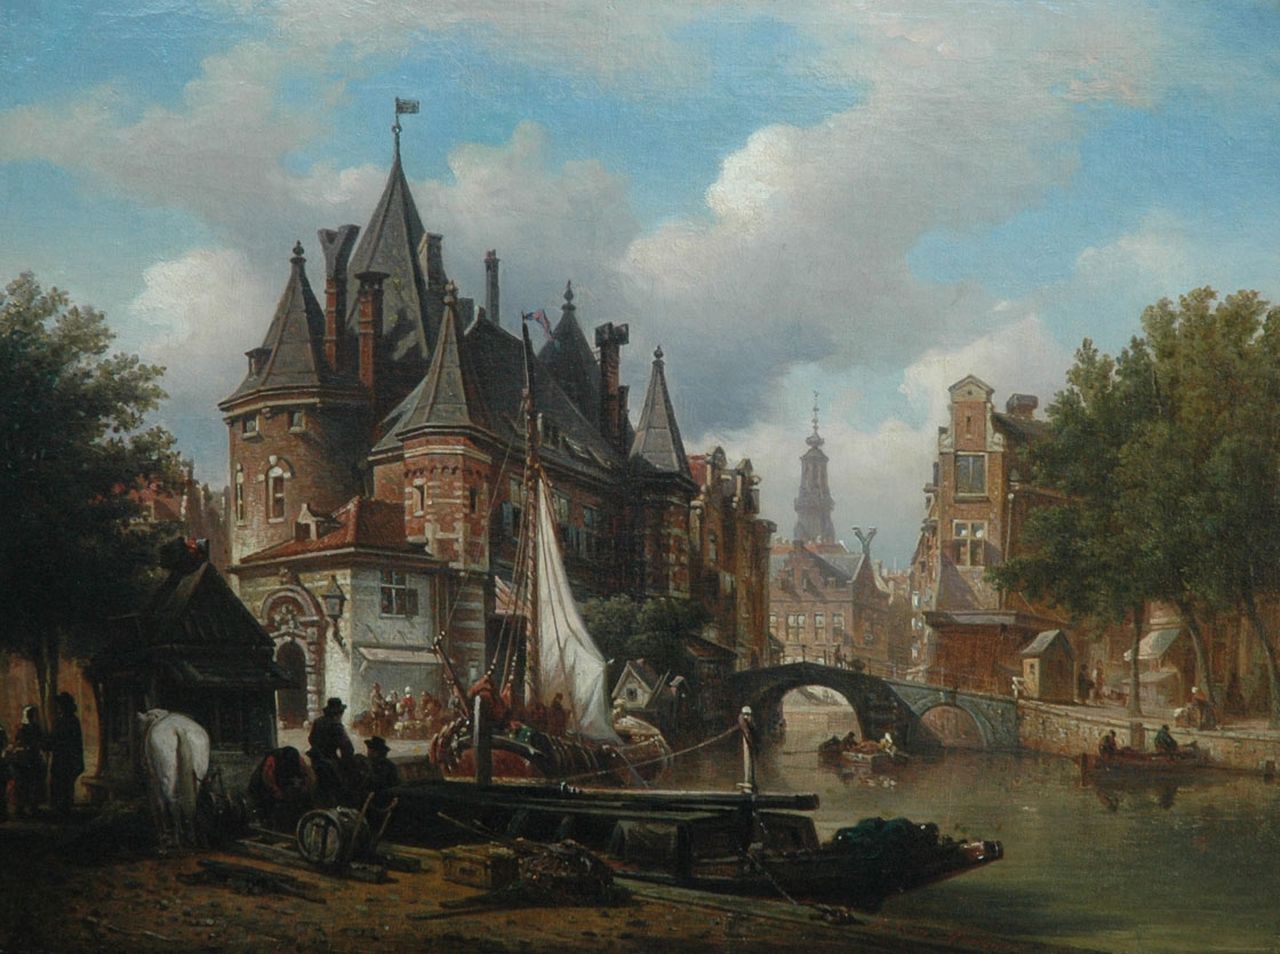 Bommel E.P. van | Elias Pieter van Bommel, A Dutch town view with De Waag, Amsterdam and the Zuiderkerkstoren, oil on canvas laid down on board 45.8 x 60.5 cm, signed r.o.t.c.